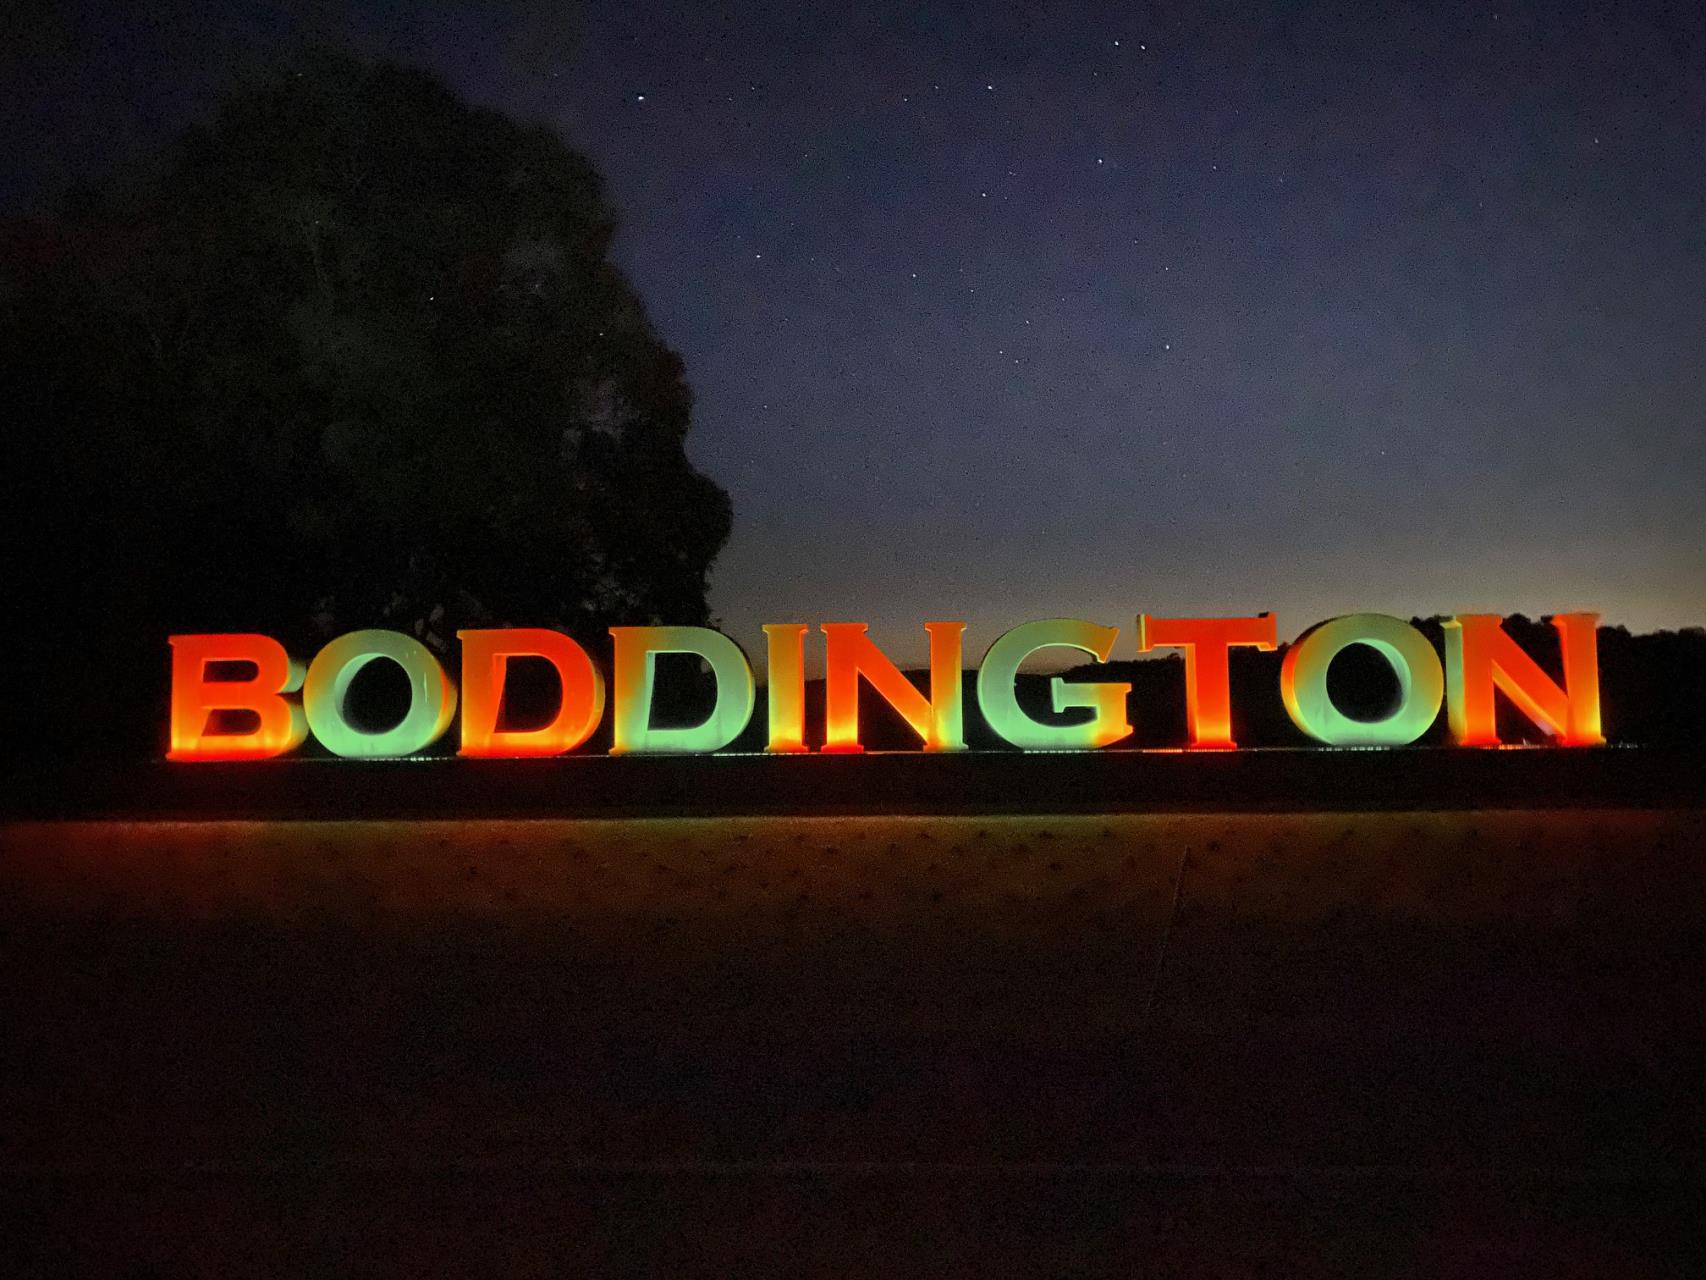 Boddington Tourism Talent Opportunity - Expressions of Interest Extended!